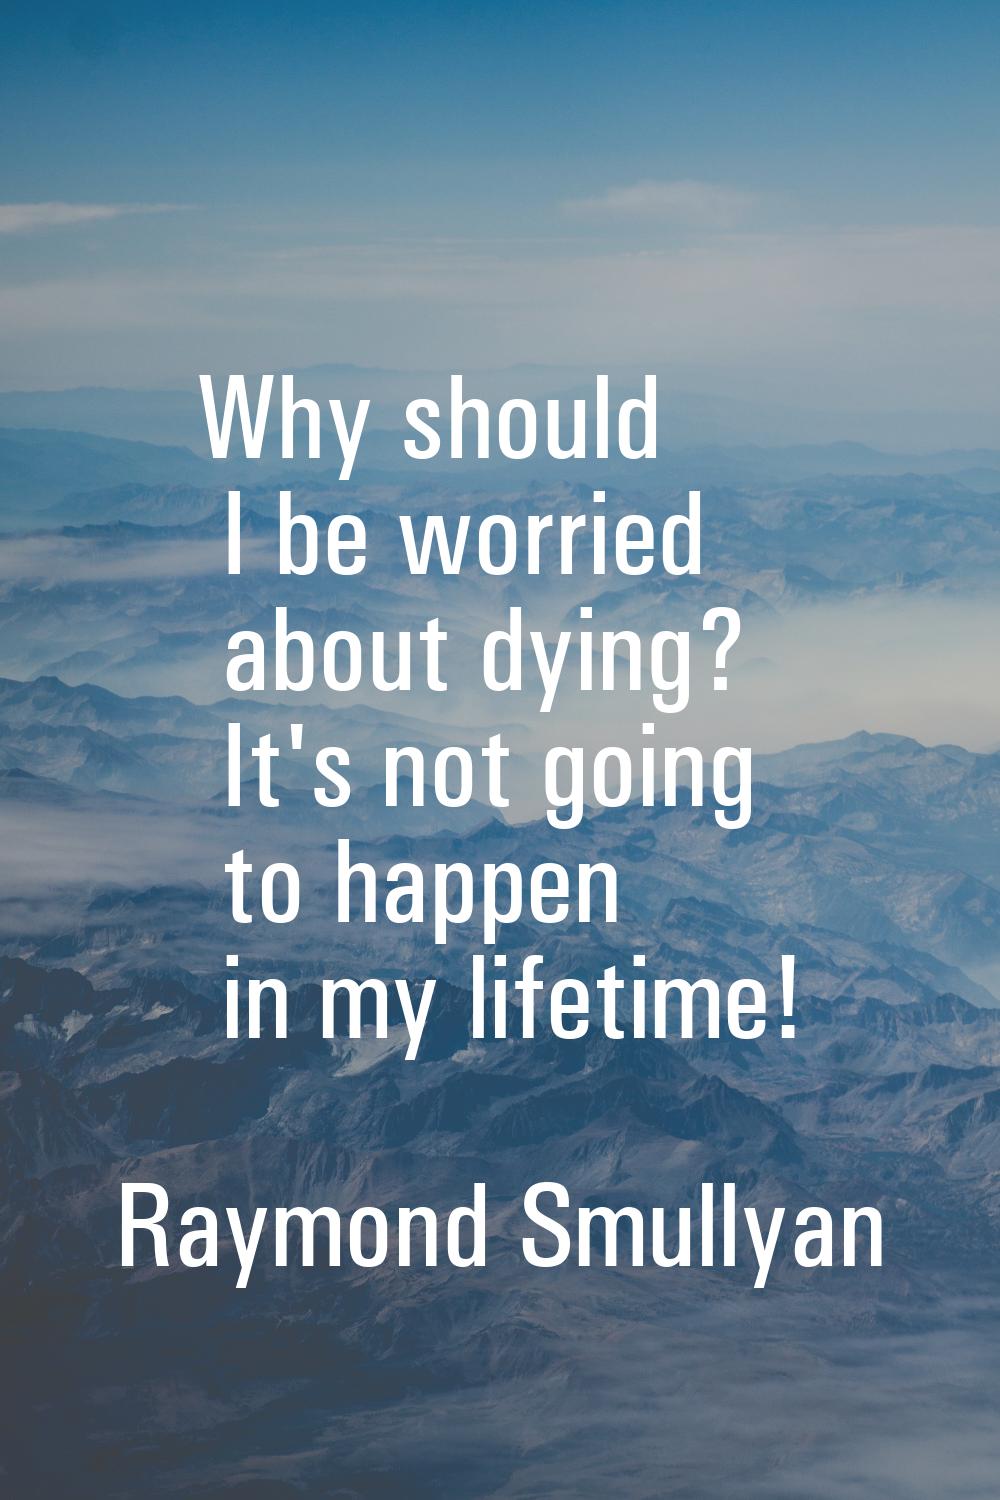 Why should I be worried about dying? It's not going to happen in my lifetime!